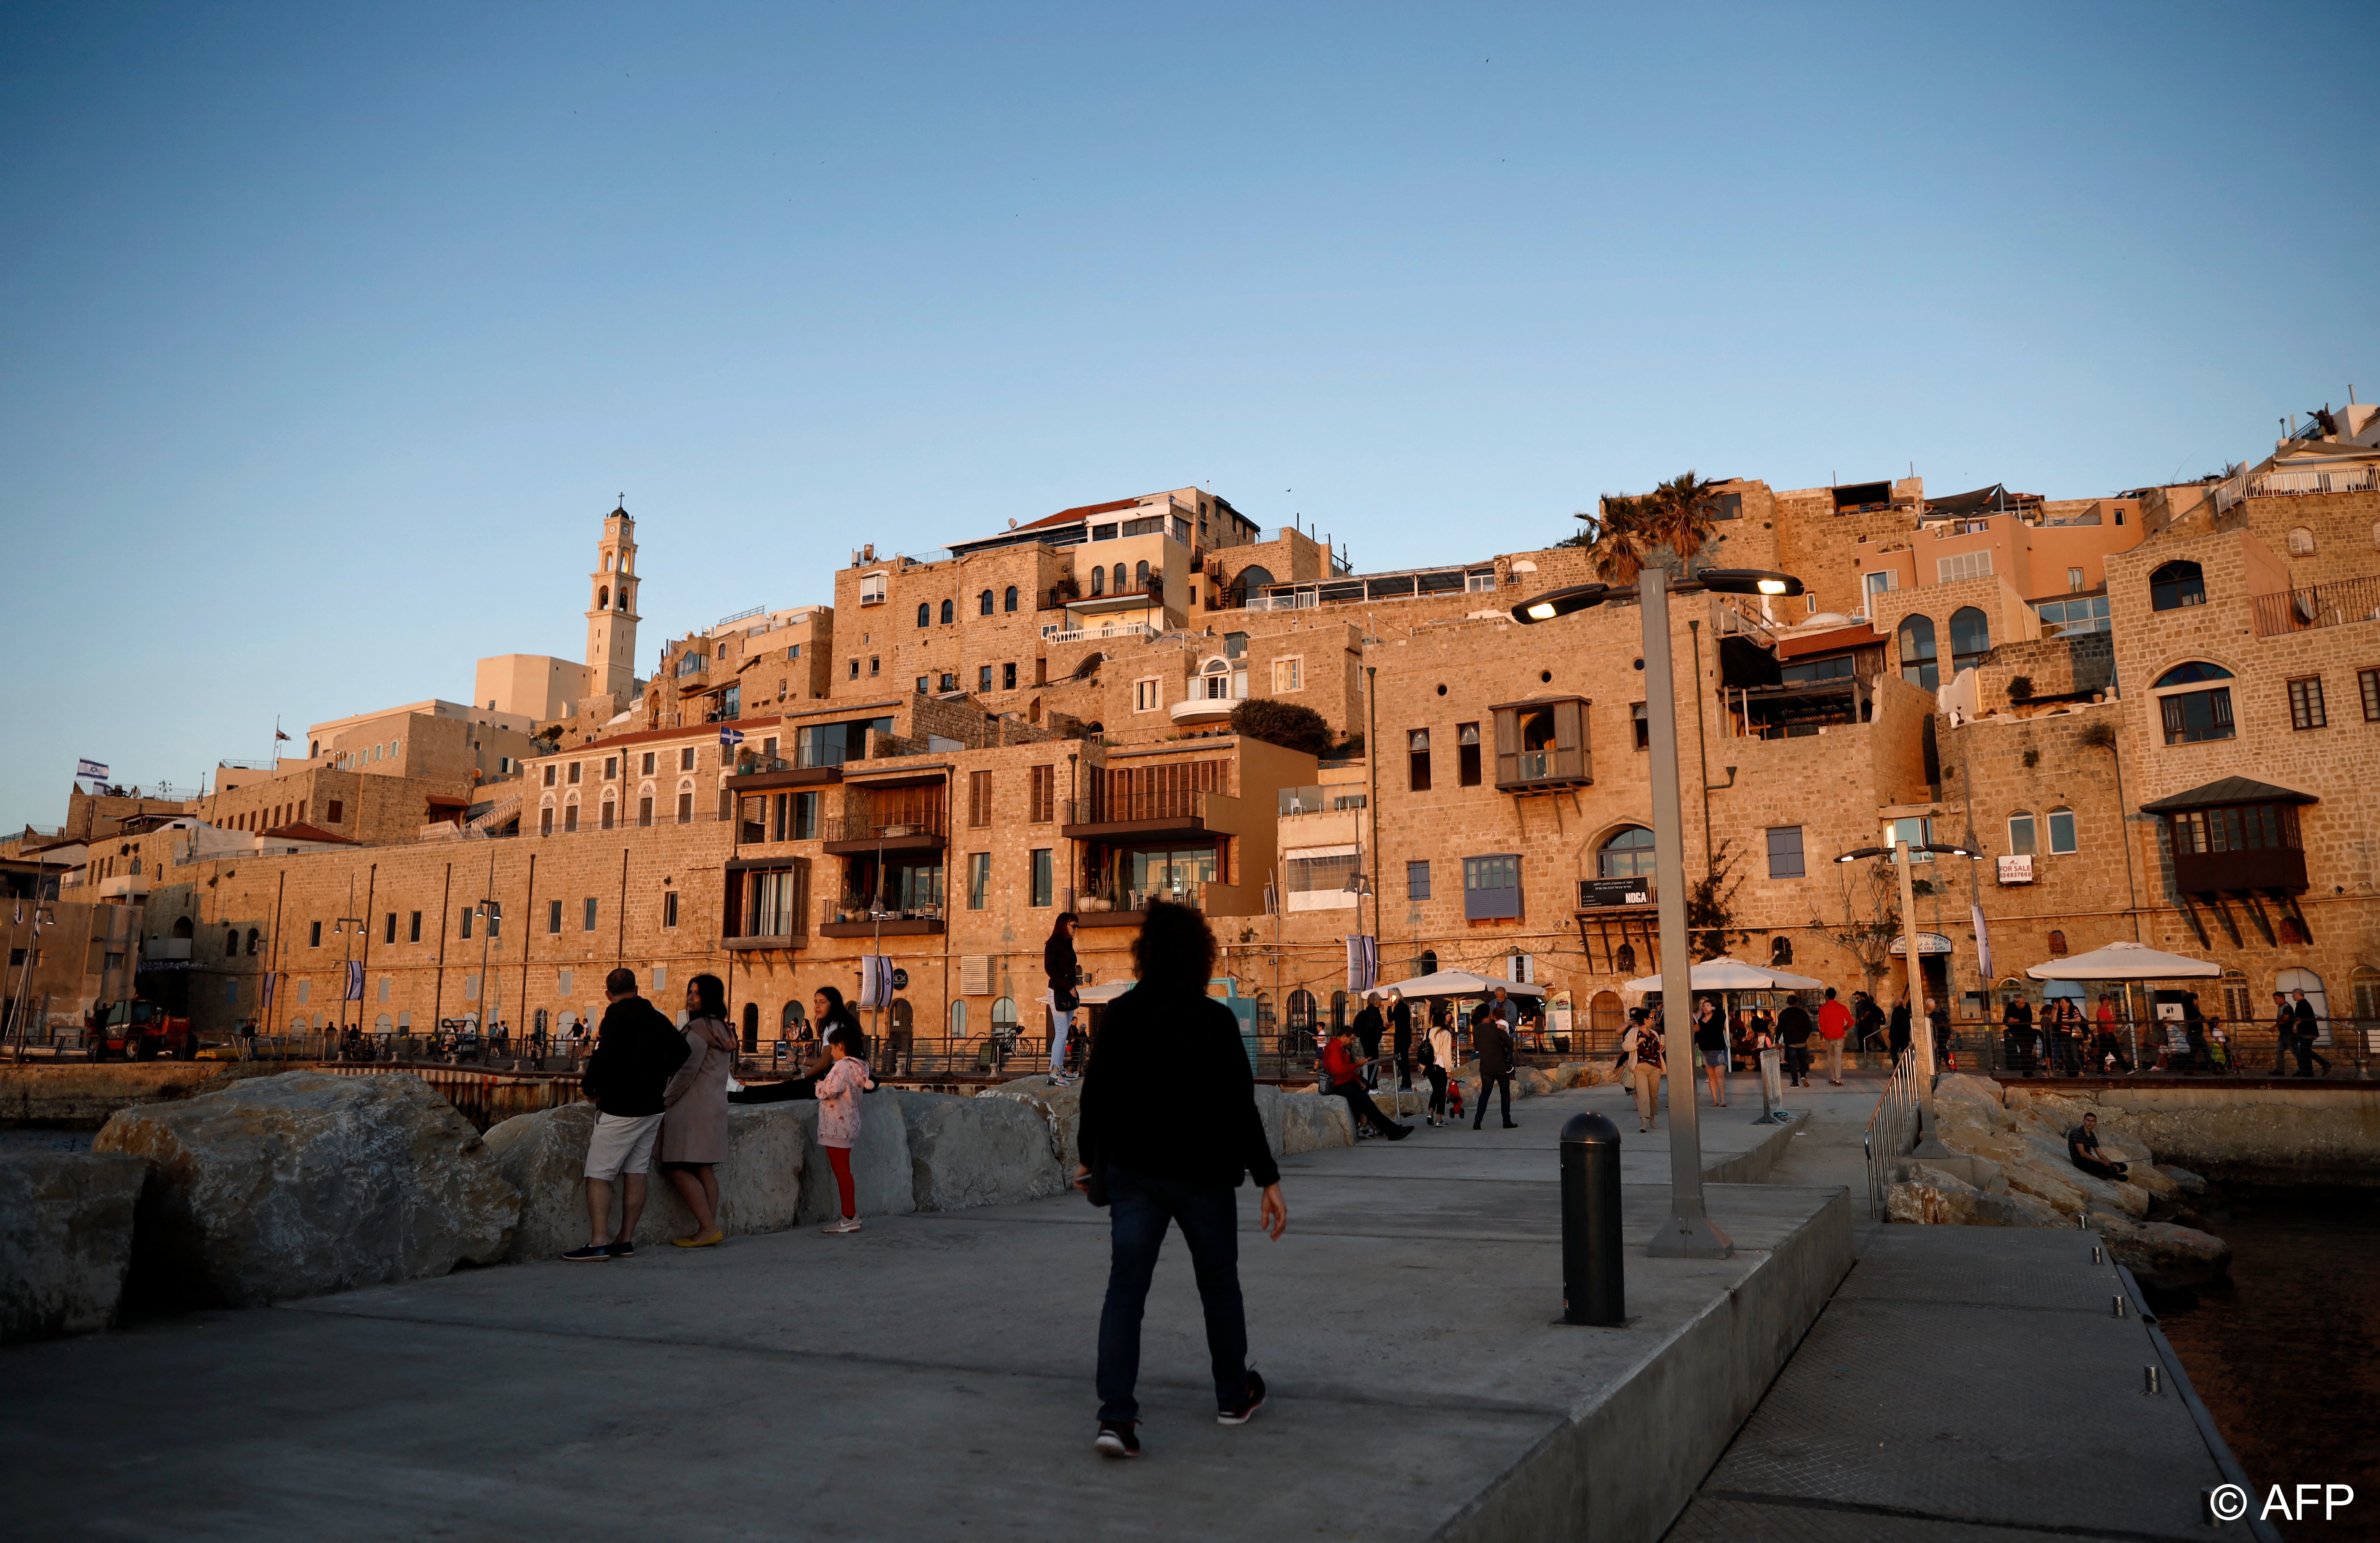 What is Palestinian? The Israeli population includes about twenty percent Arabs, they are Muslims or Christians and often refer to themselves as Palestinians. Many of them live in the big cities like Jerusalem or, as here, in the old city of Jaffa in Tel Aviv.